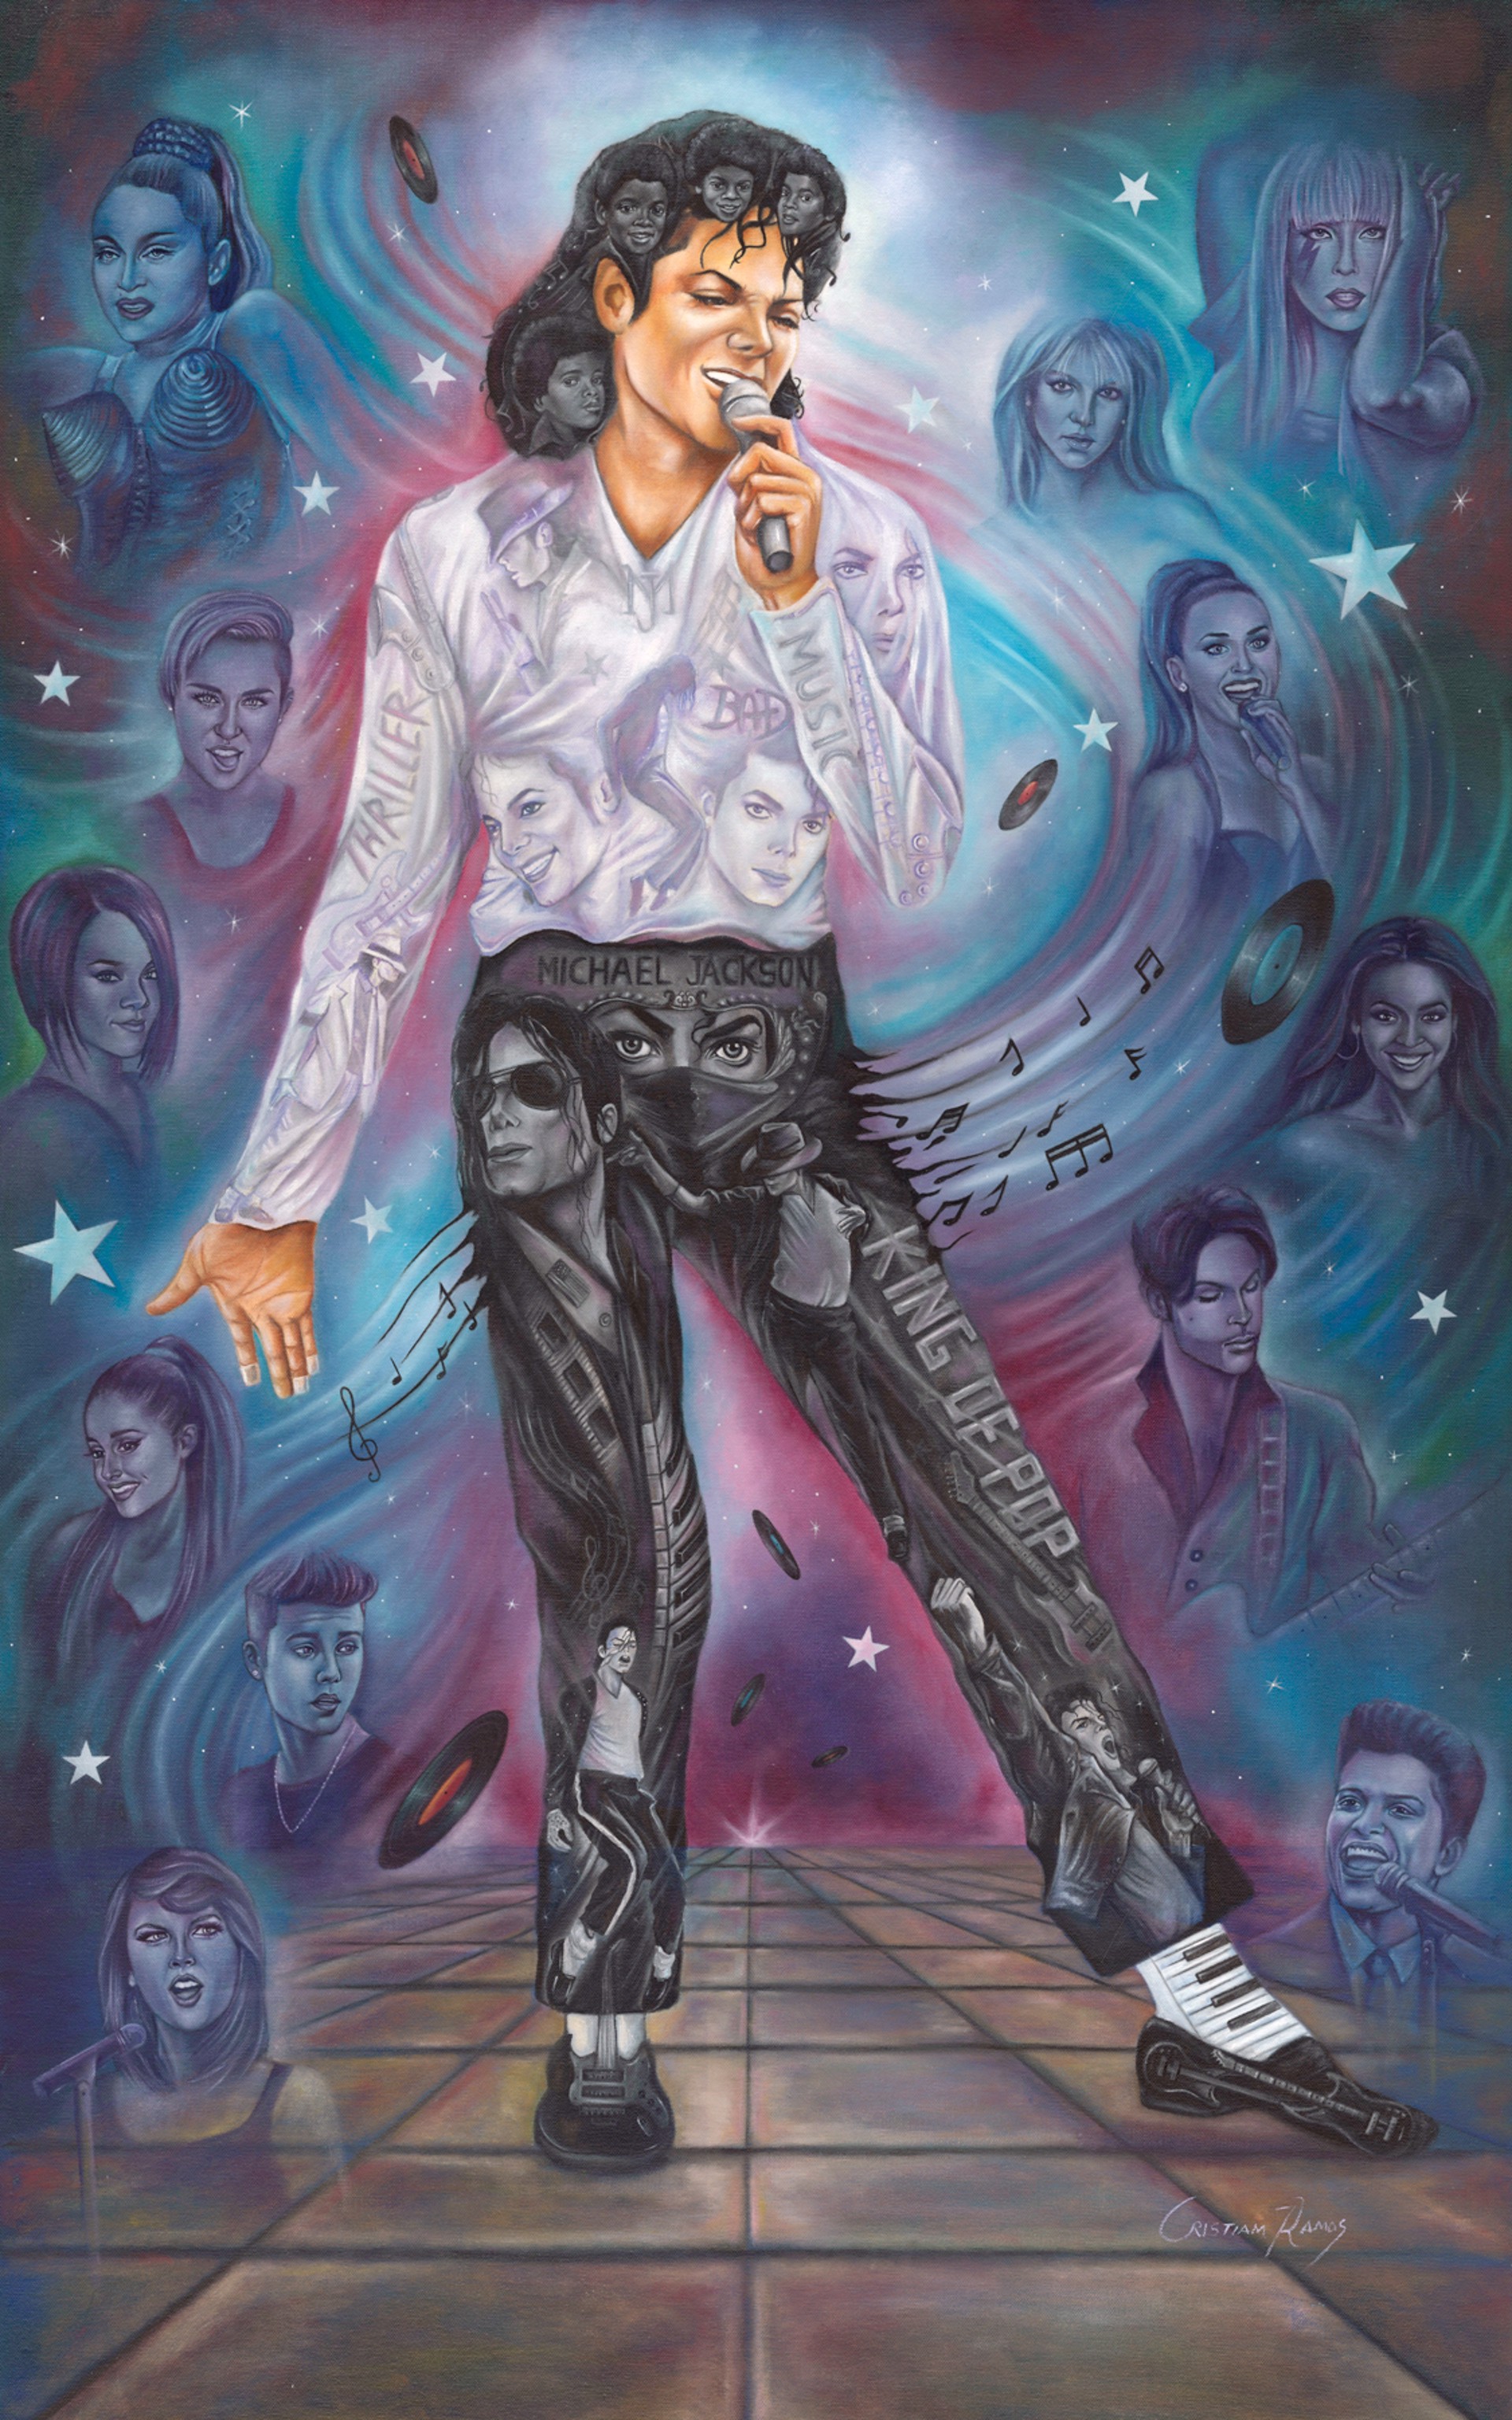 The King of Pop by Cristiam Ramos